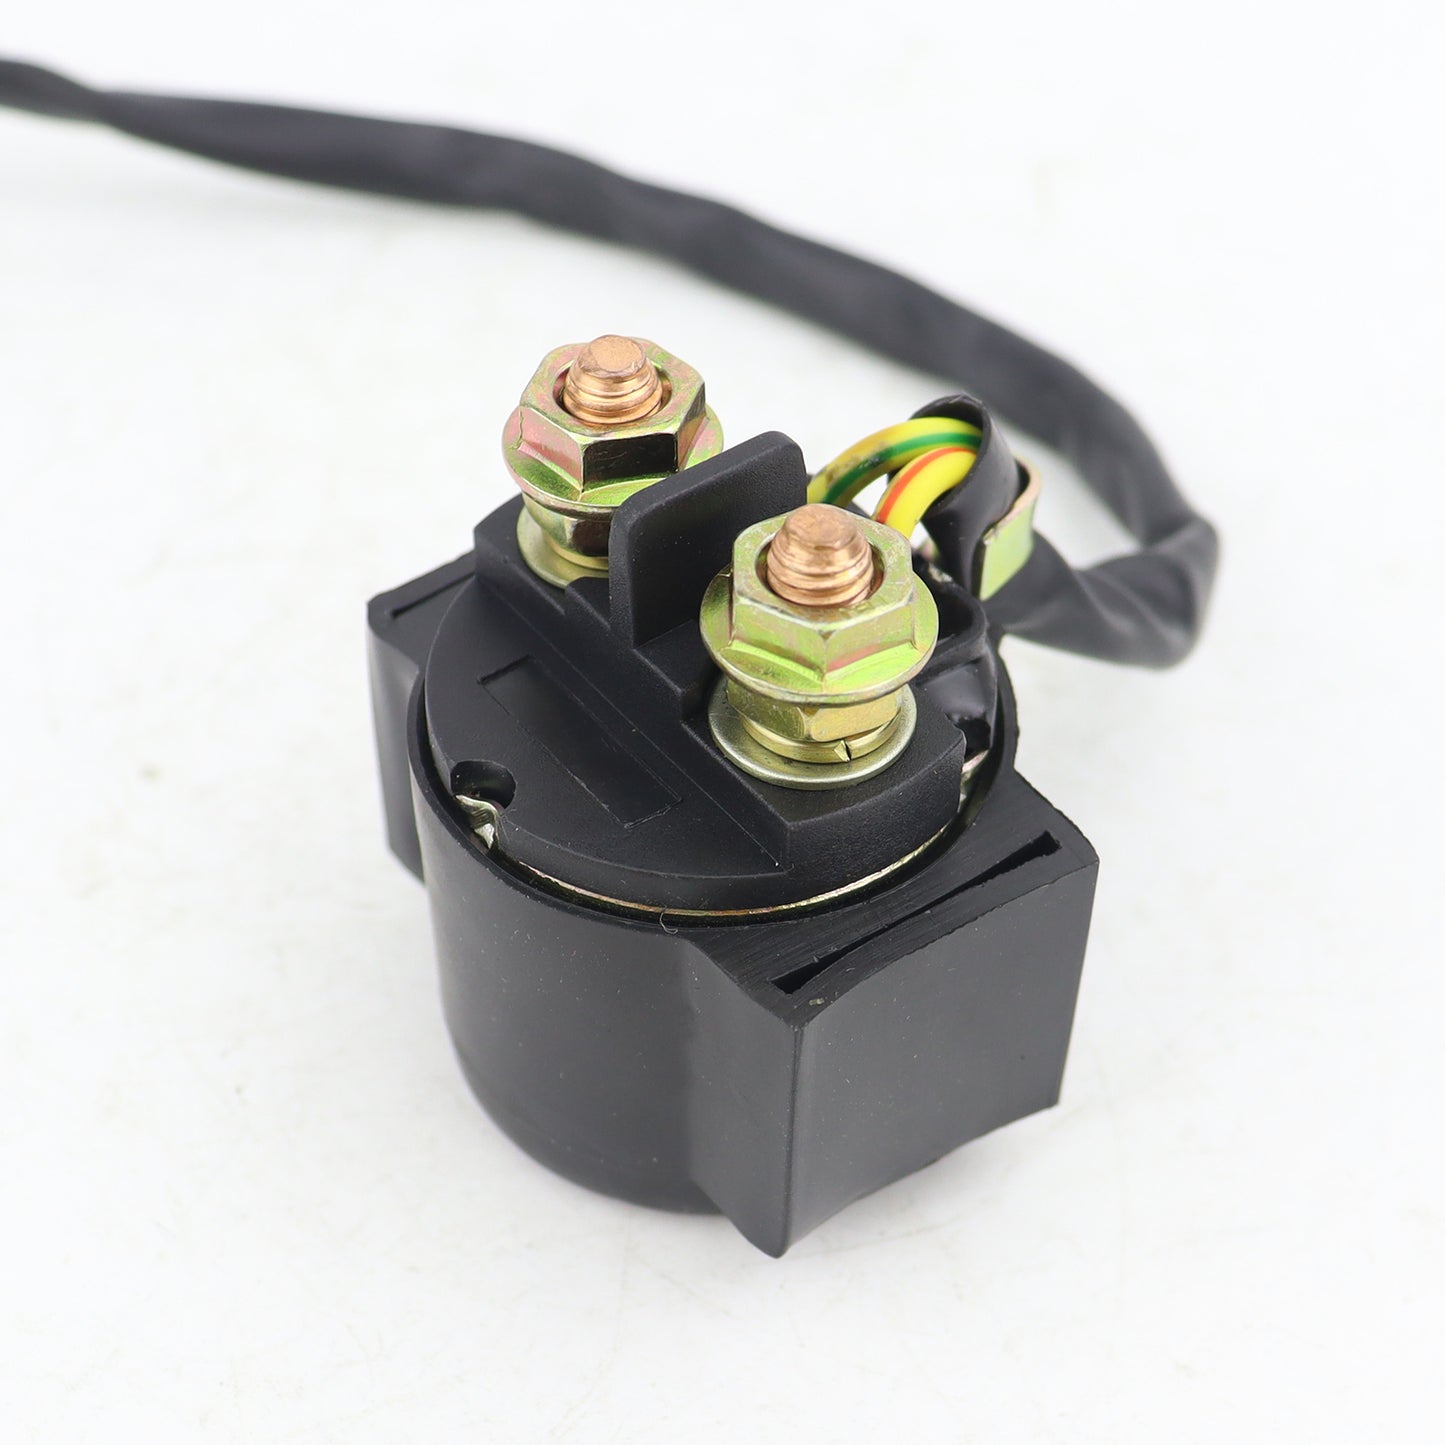 SMF Starter Solenoid Relay for Solenoid 12V for Chinese Scooter ATV 50cc 90cc 110cc 125cc 150cc 250cc